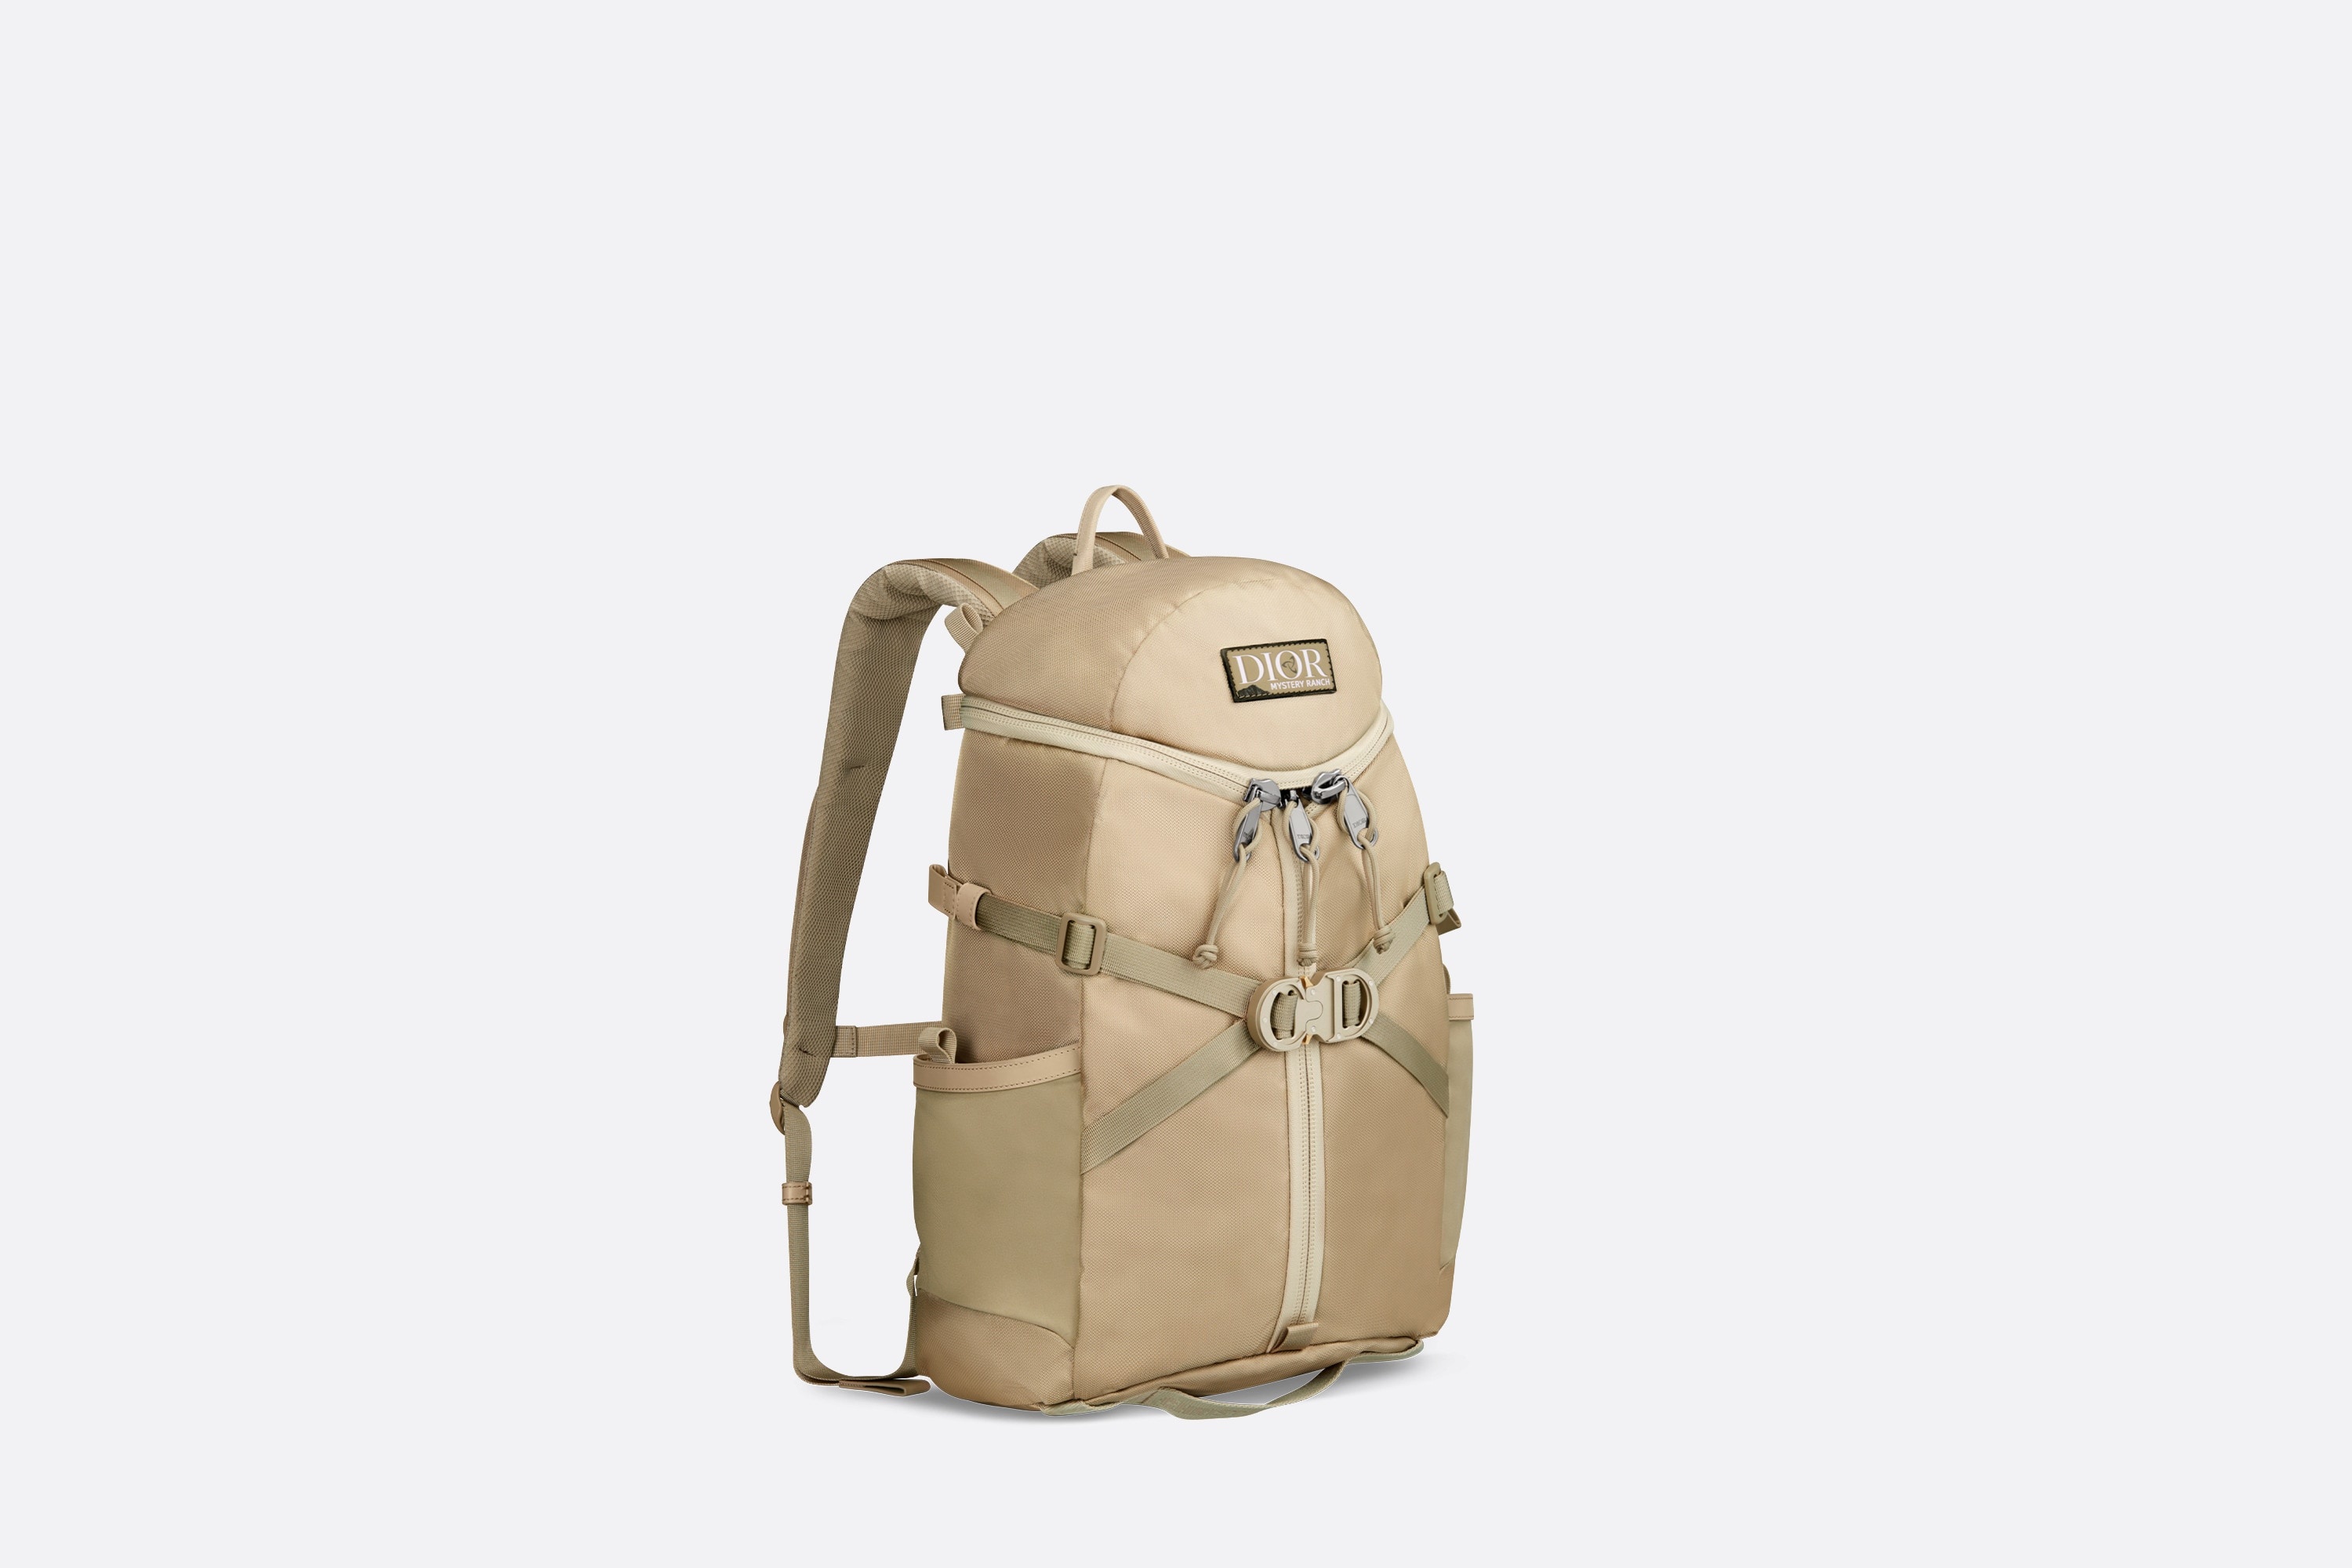 DIOR by MYSTERY RANCH Gallagator Backpack - 2